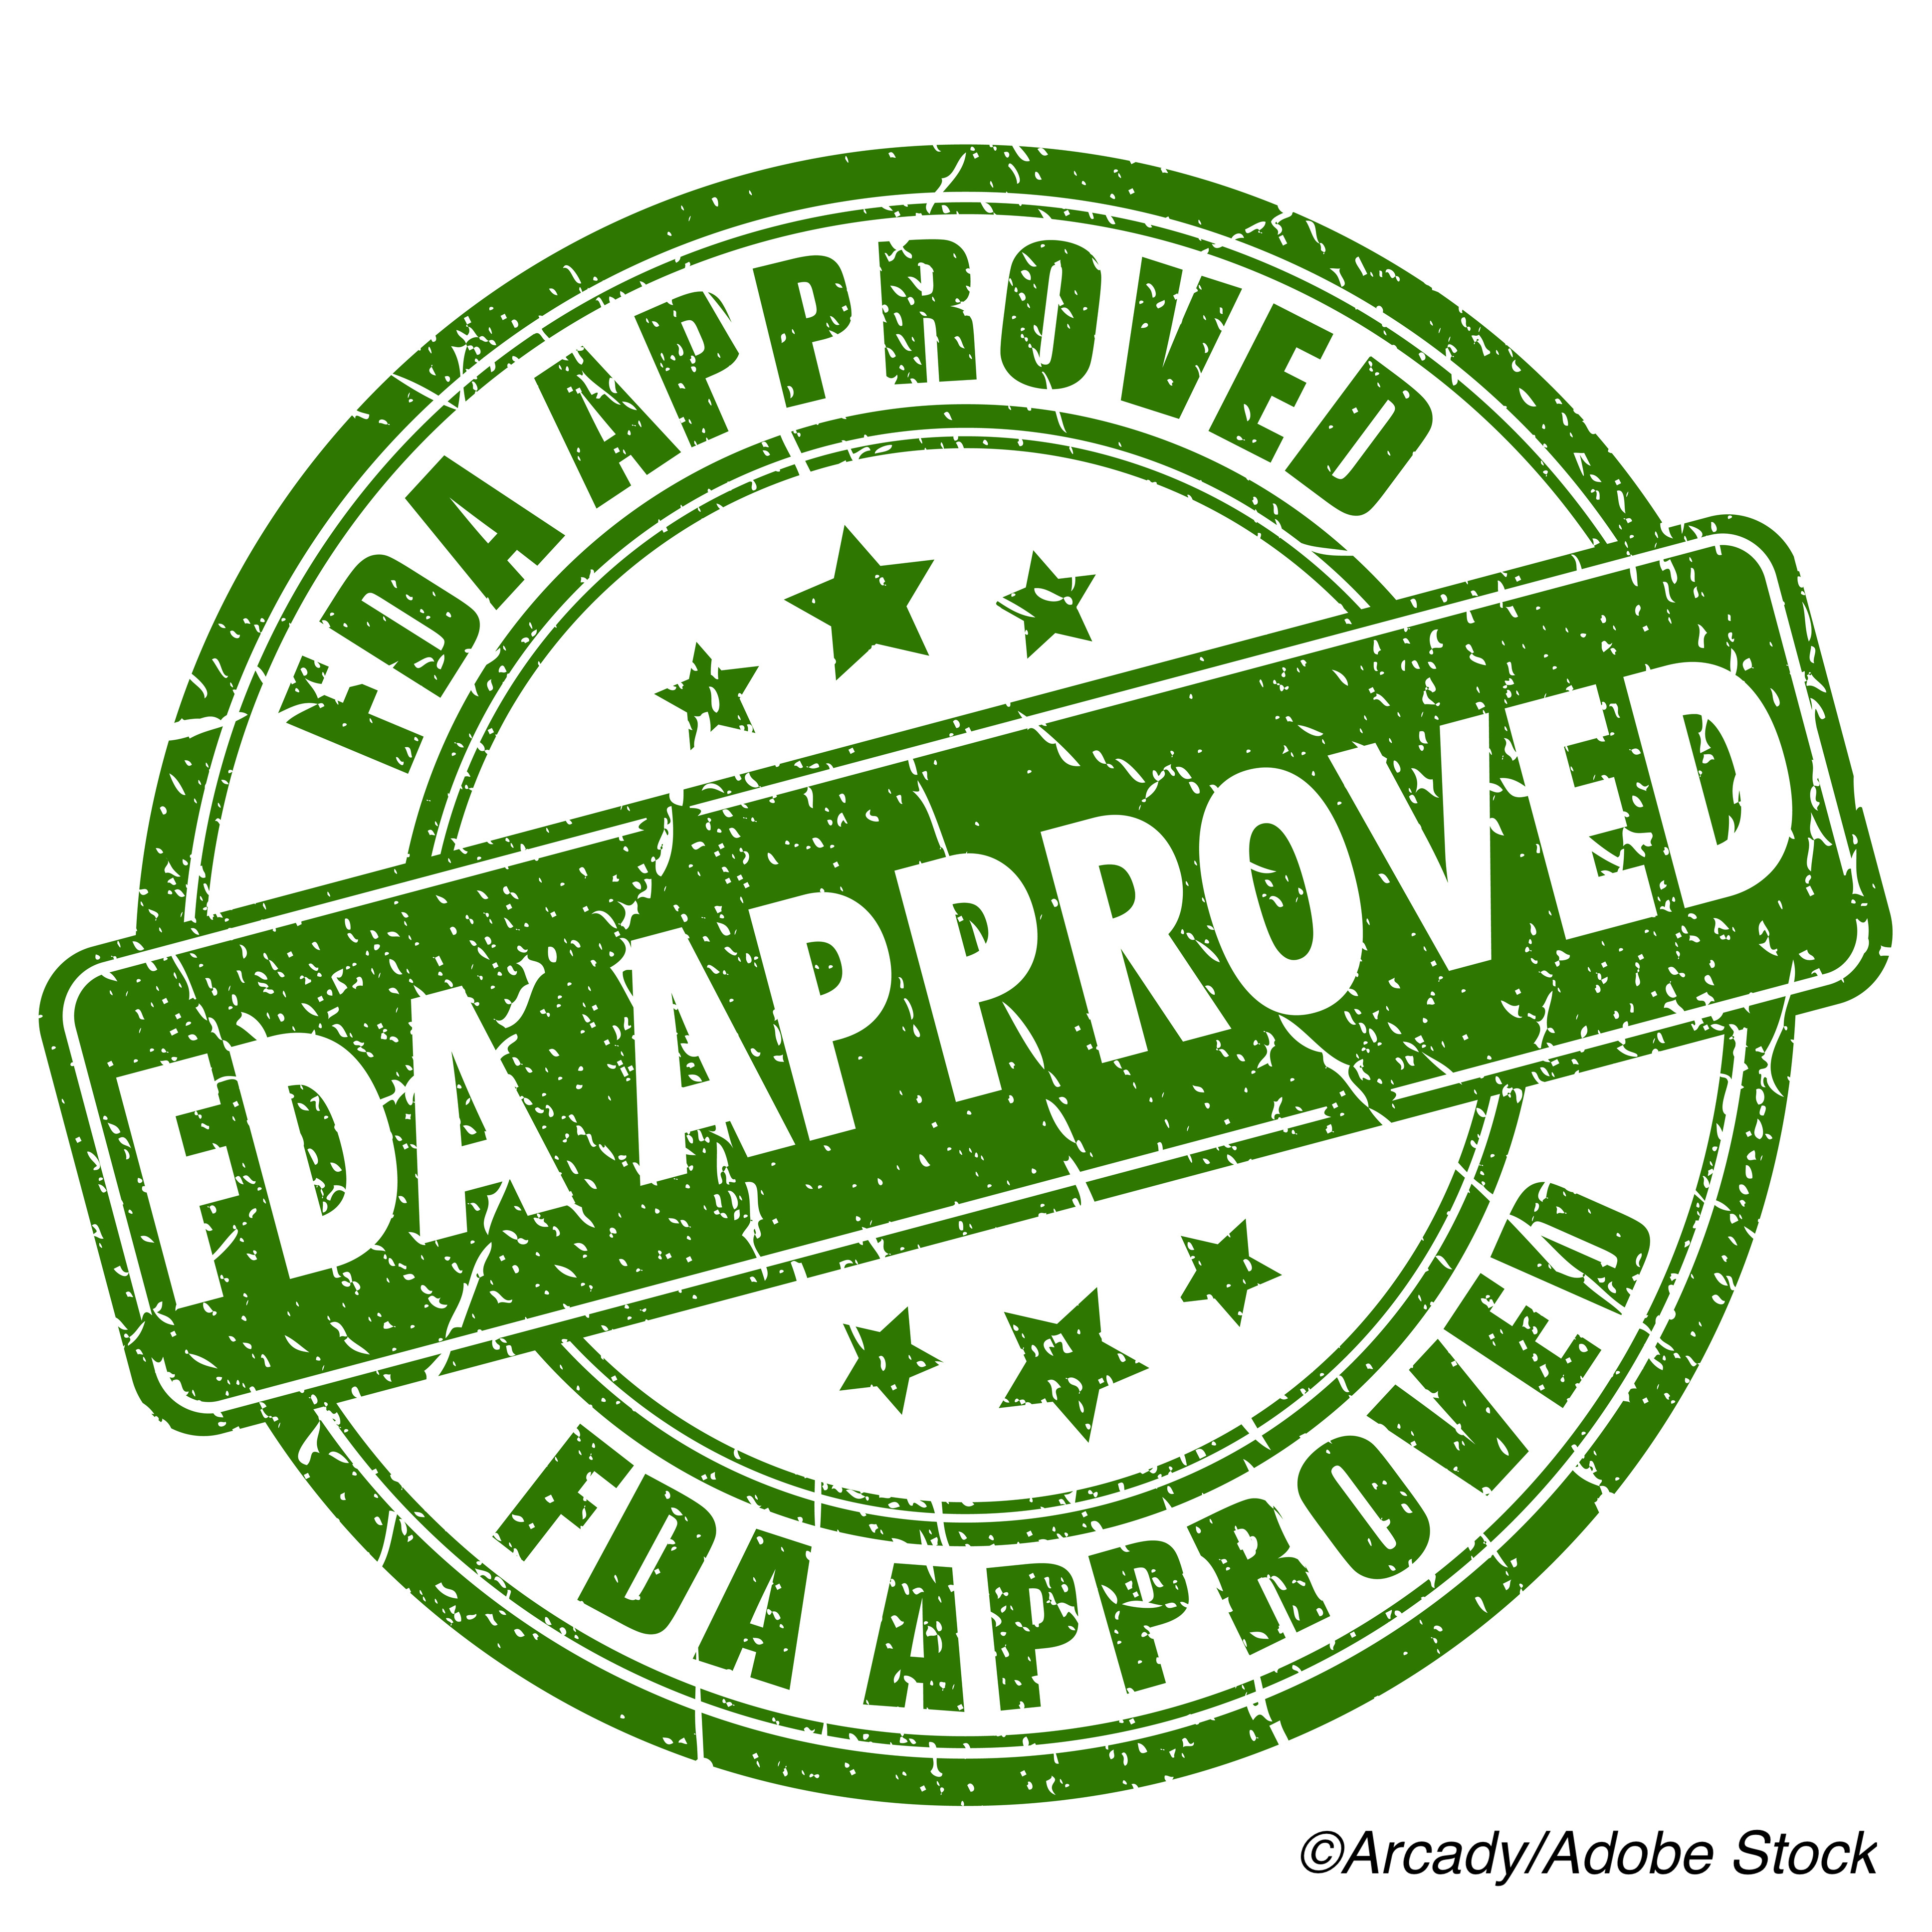 FDA OKs Accelerated Approval of Dostarlimab for dMMR Endometrial Cancer